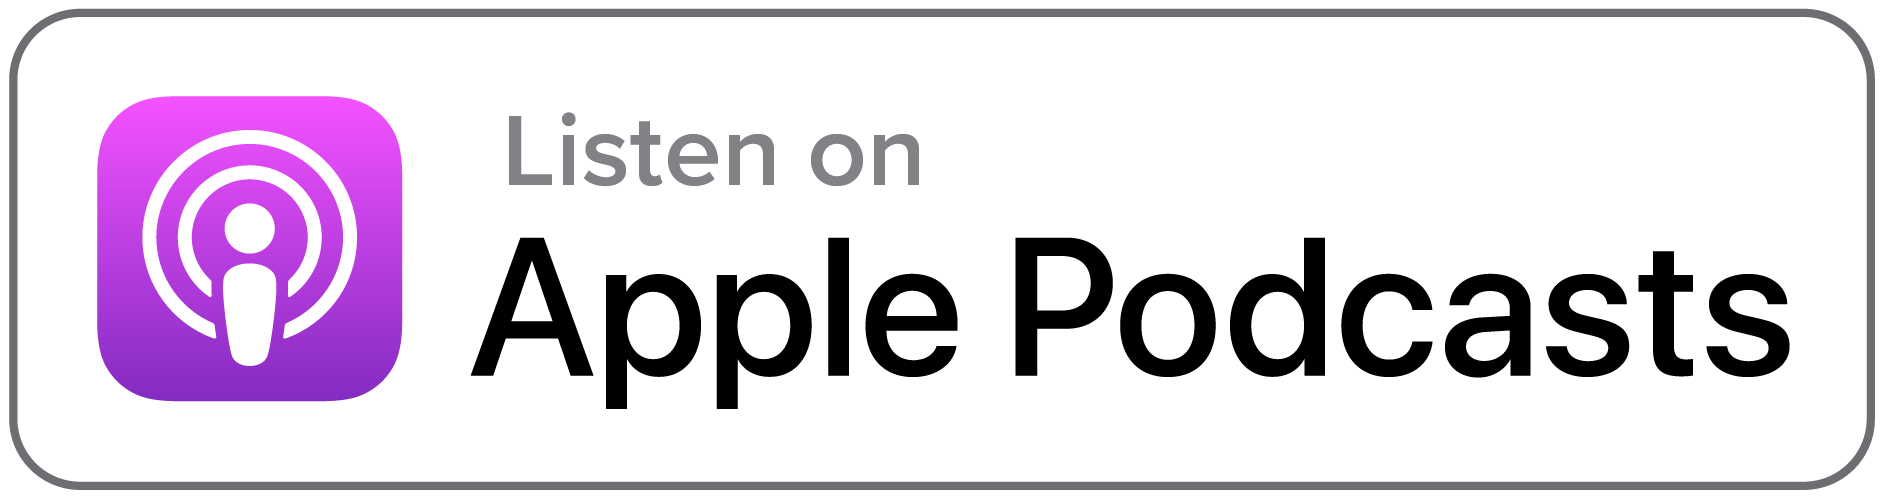 subscribe in Apple podcasts